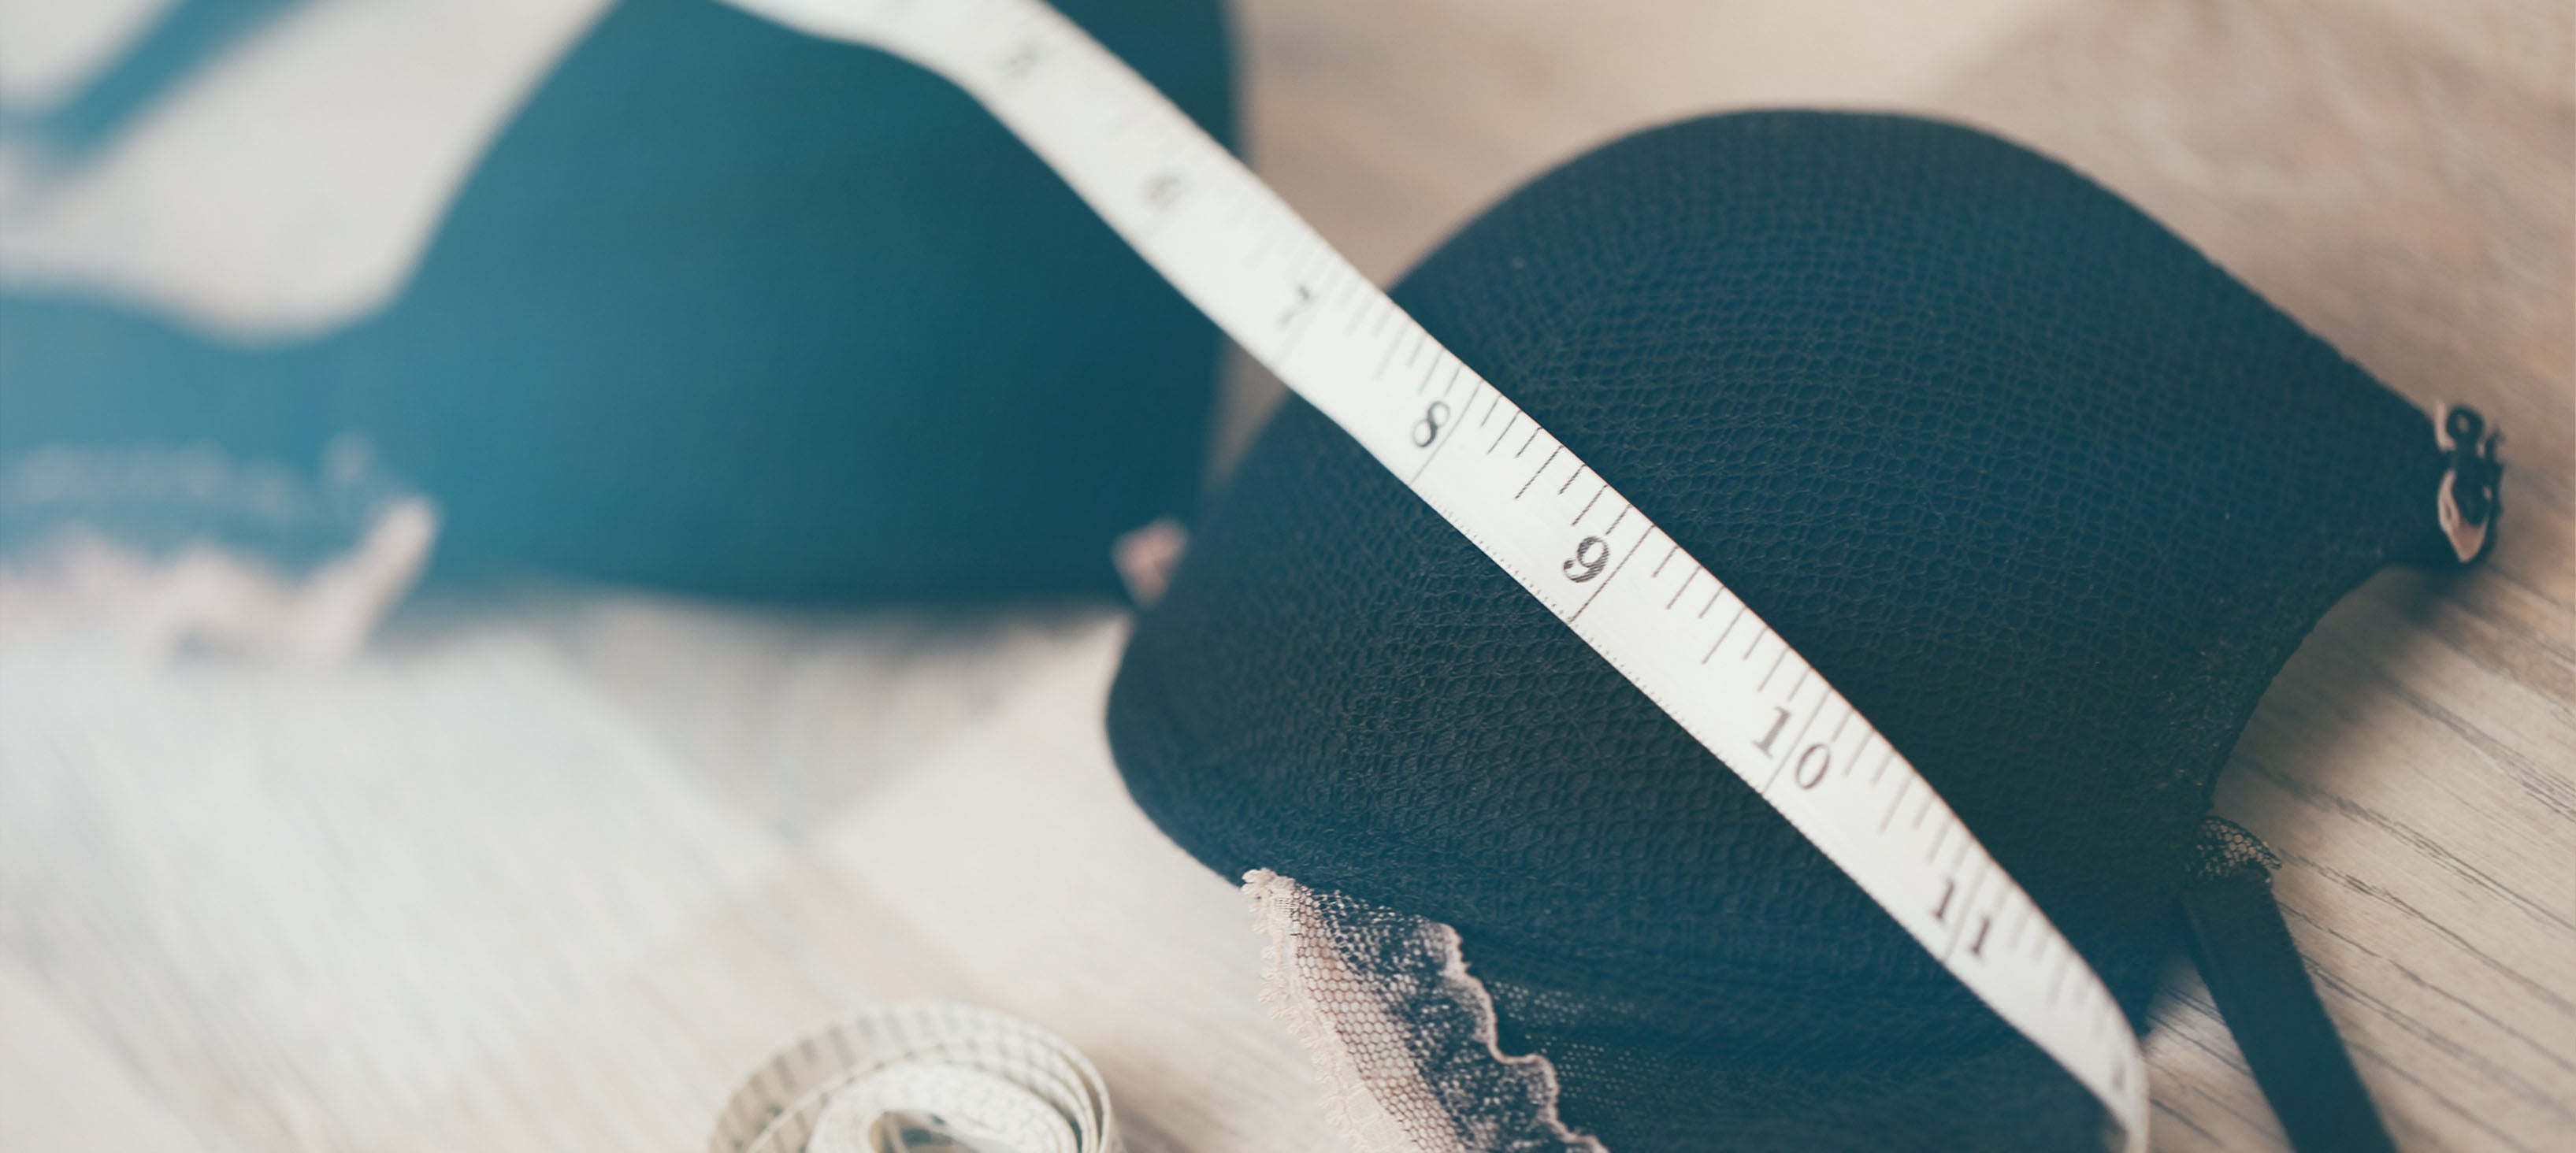 5 Tips For A Better Fitting Bra - The Chronicle of the Horse